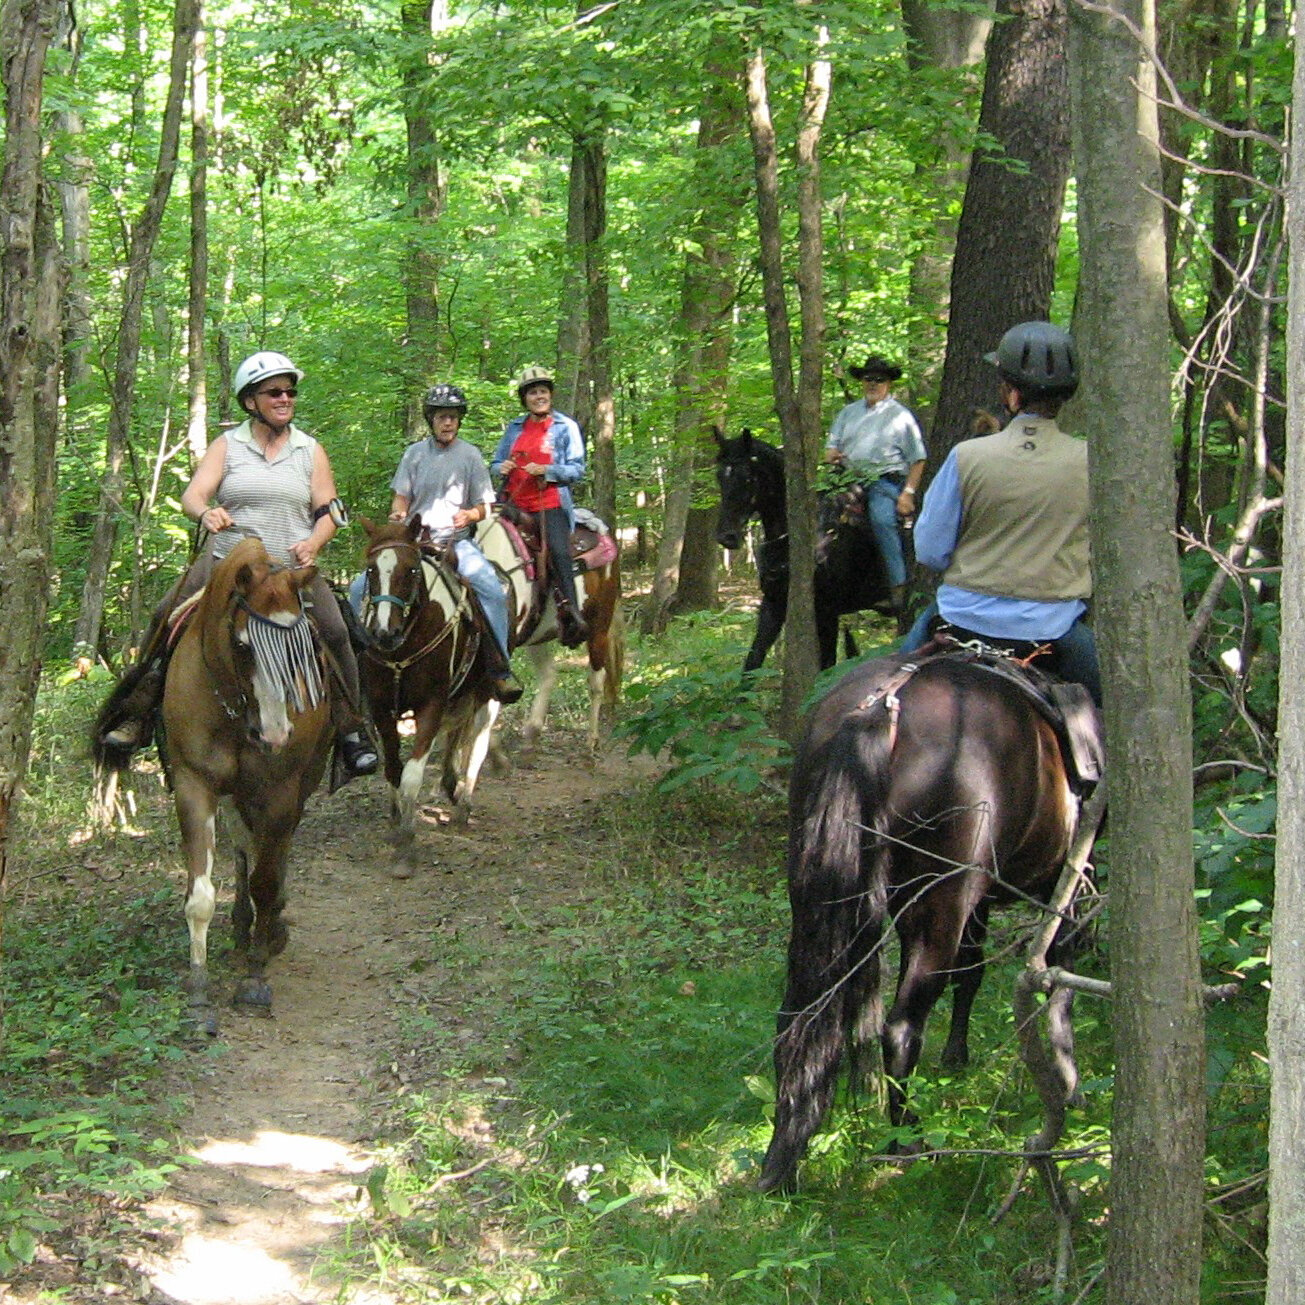 Horseback riders on the trail at Kipton Reservation